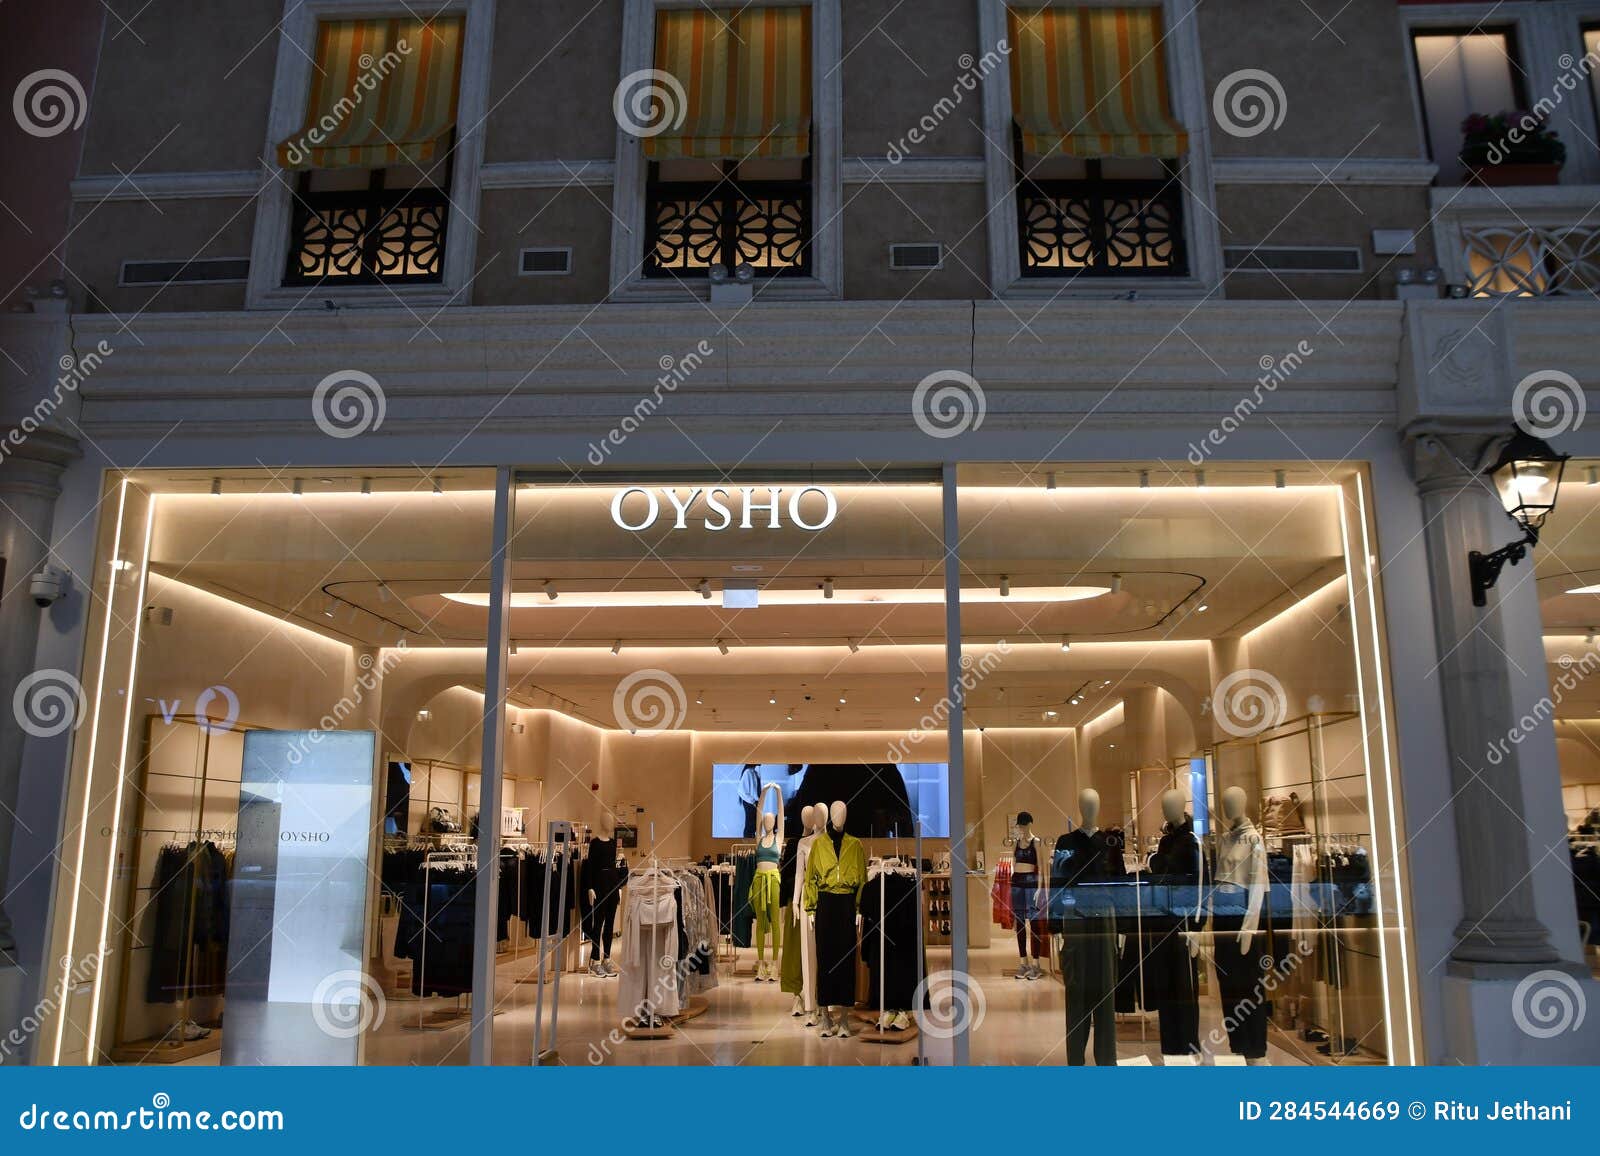 Spanish clothing retailer specialising in women's homewear and undergarments  owned by Inditex group, Oysho, store seen in Spain Stock Photo - Alamy